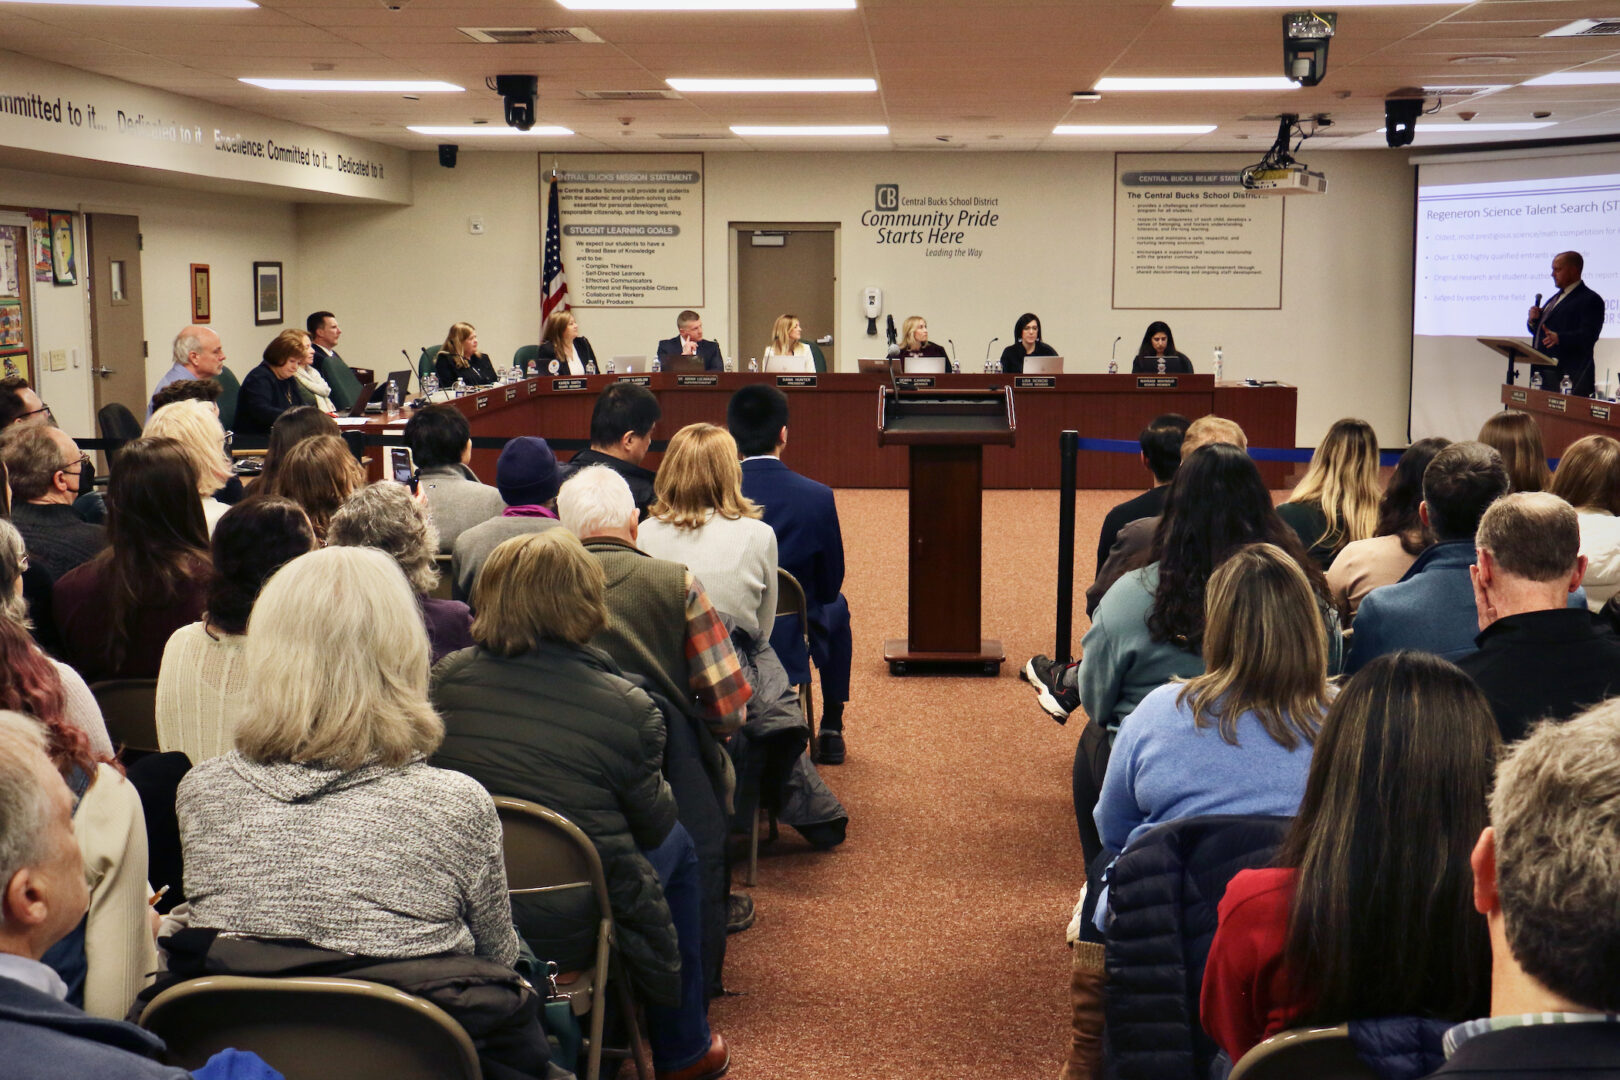 About 100 people fill a Central Bucks School Board meeting room on Feb. 7, 2023. More waited outside who were denied entrance to avoid overcrowding.